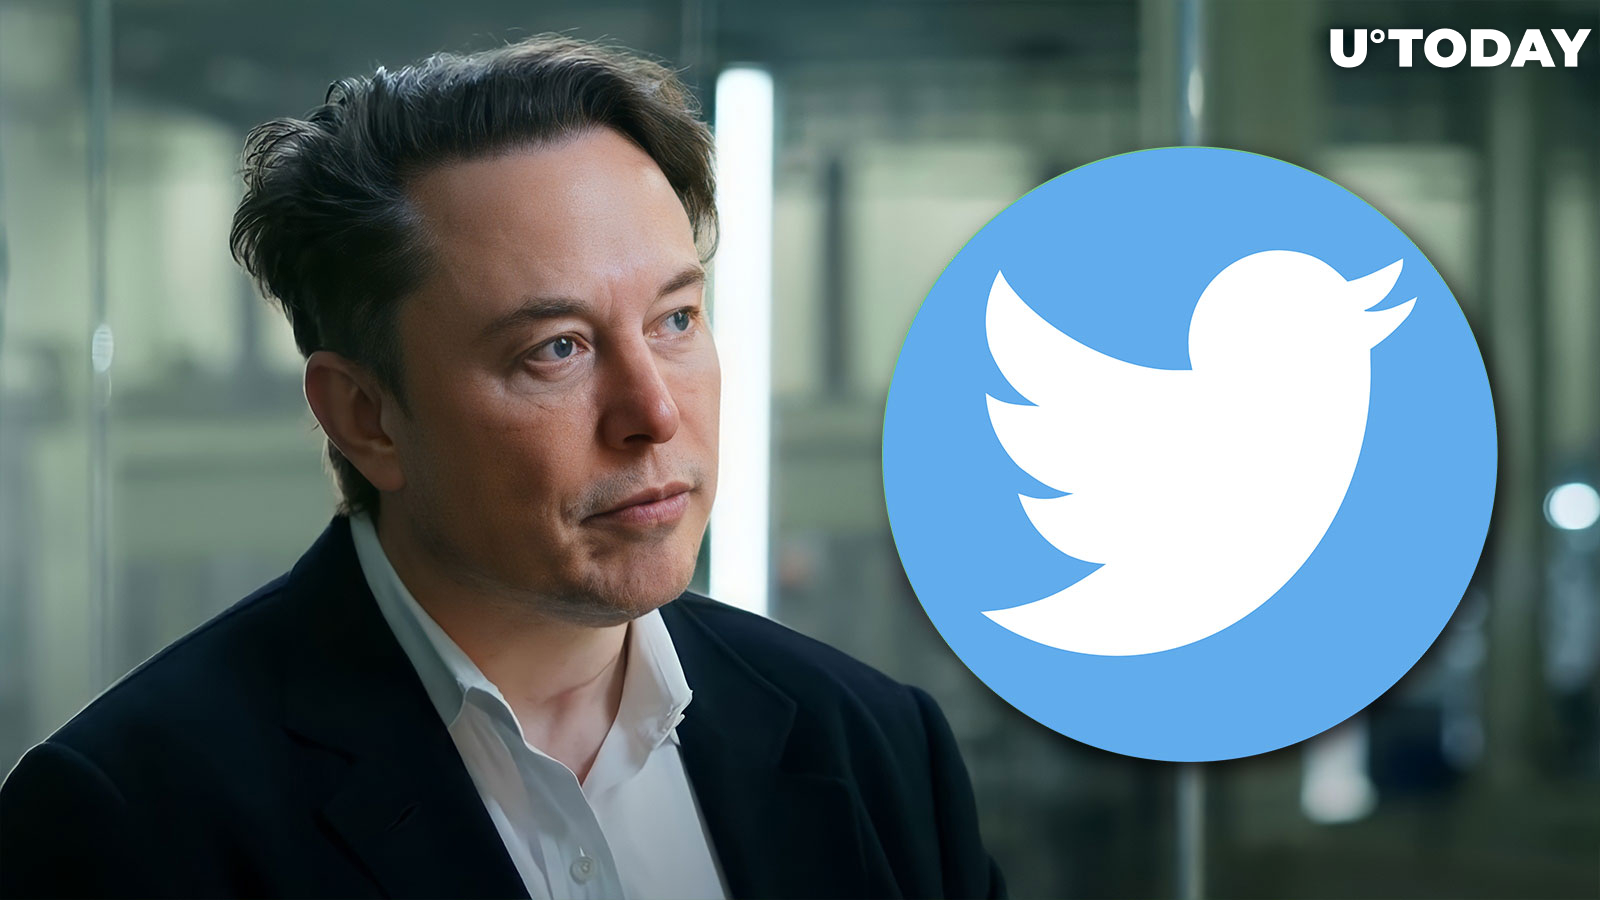 "Deal of the Year": New Elon Musk Crypto Scam Targeting Twitter Users